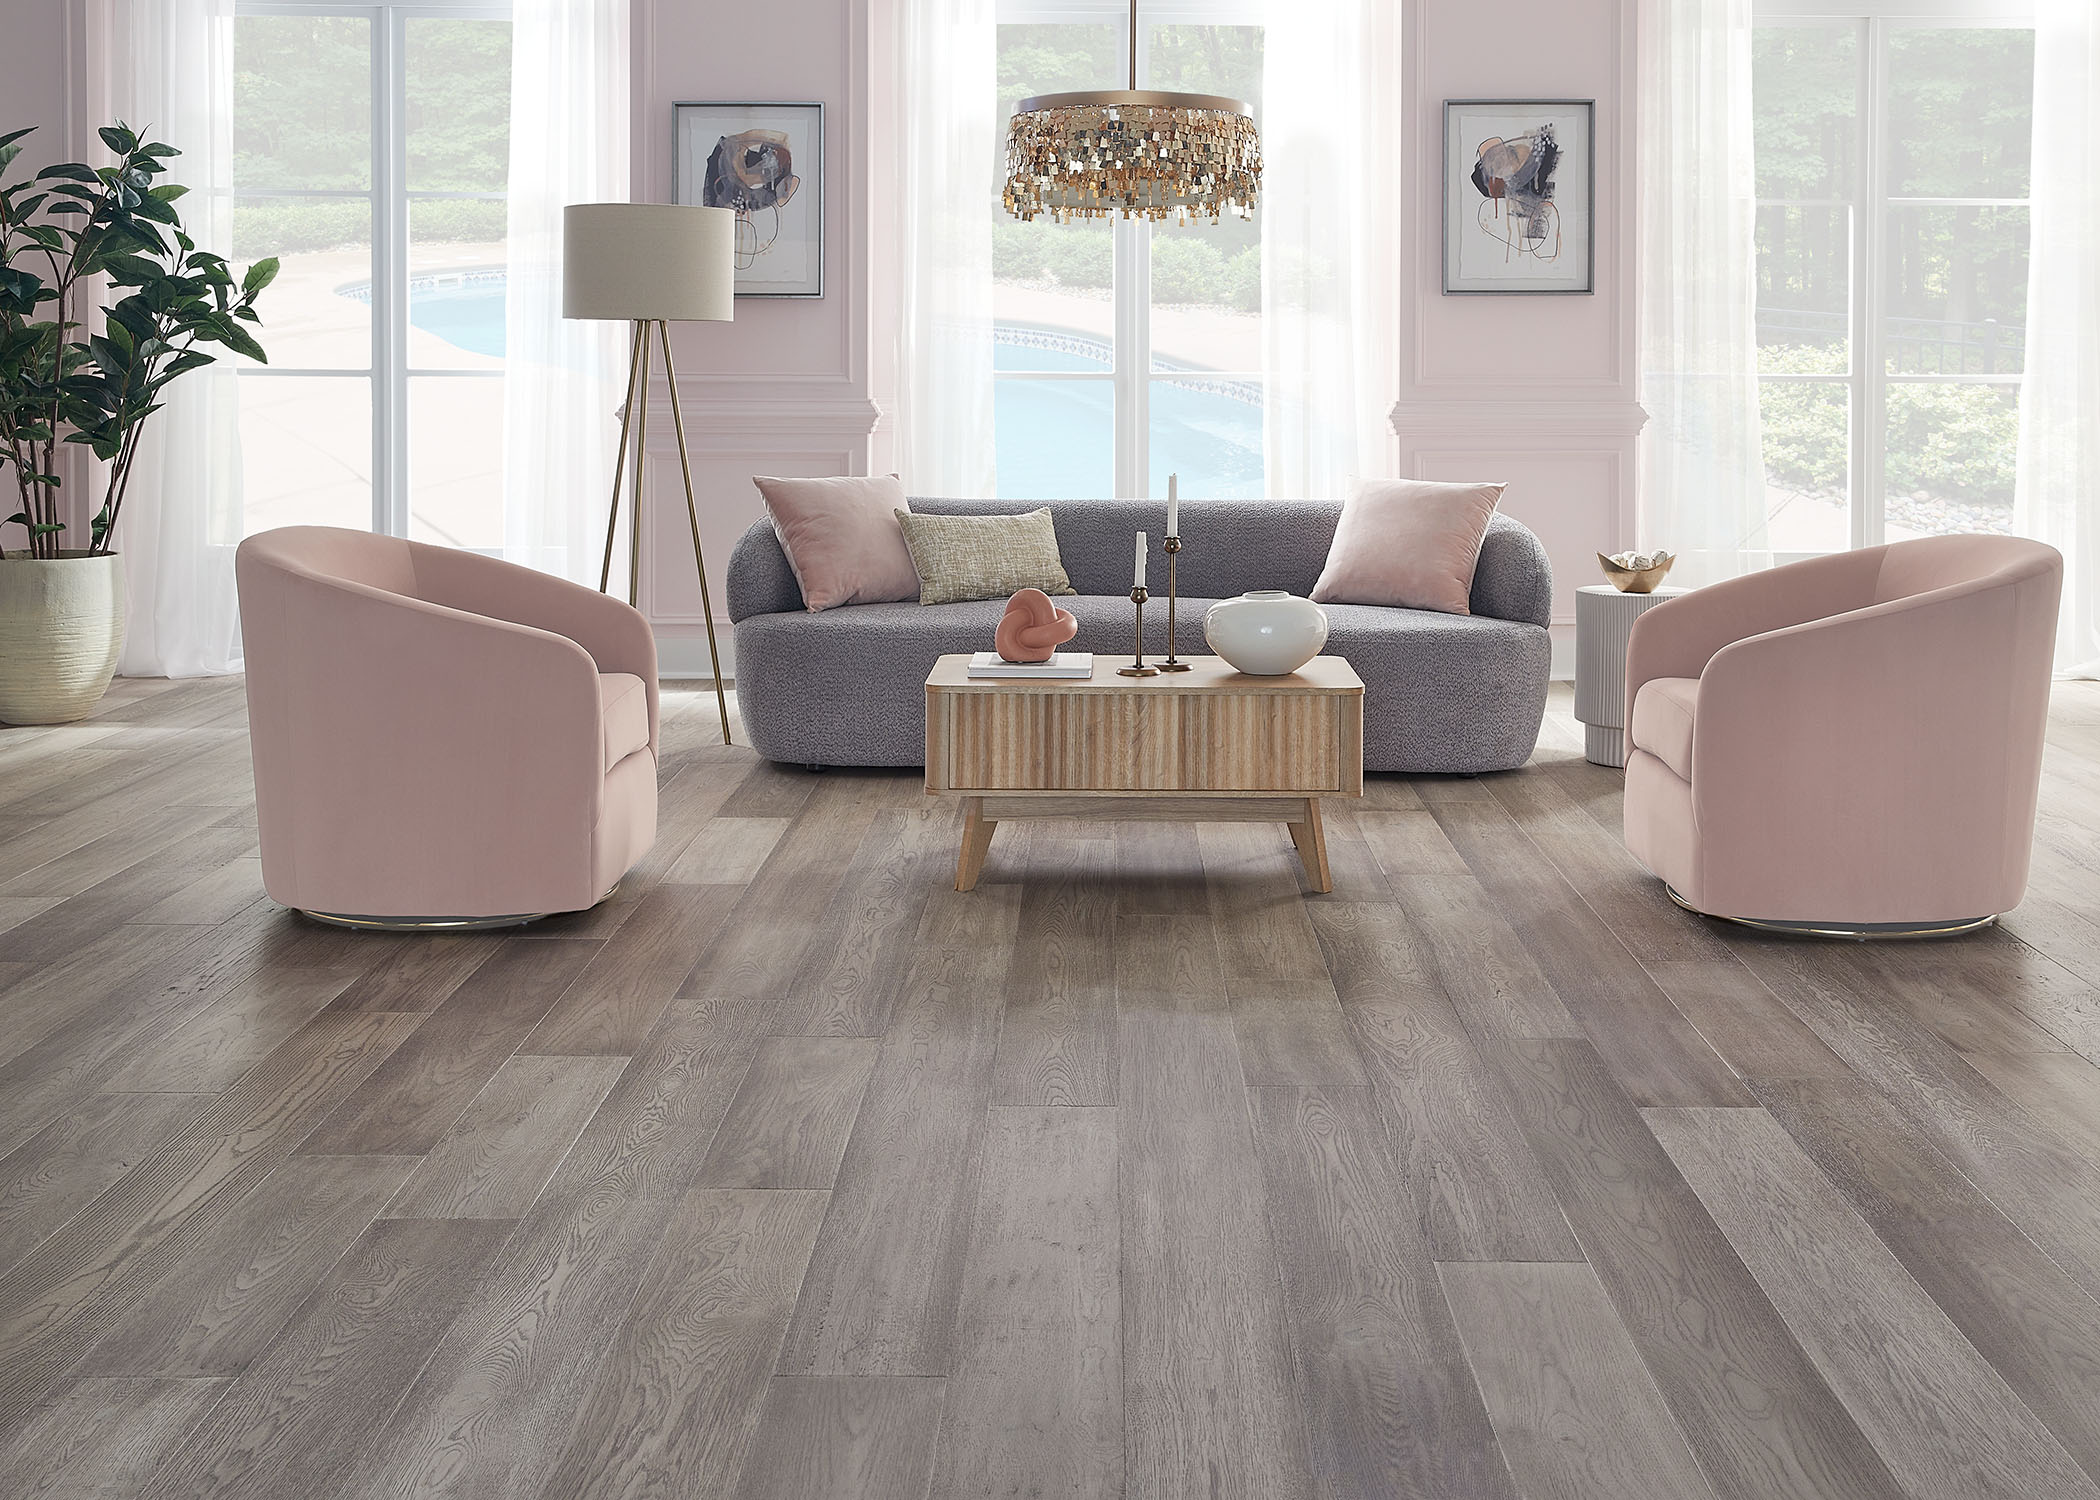 light gray engineered hardwood floor in living room with gray sofa with pale pink accent pillows and pink barrel chairs plus blonde wood cocktail table